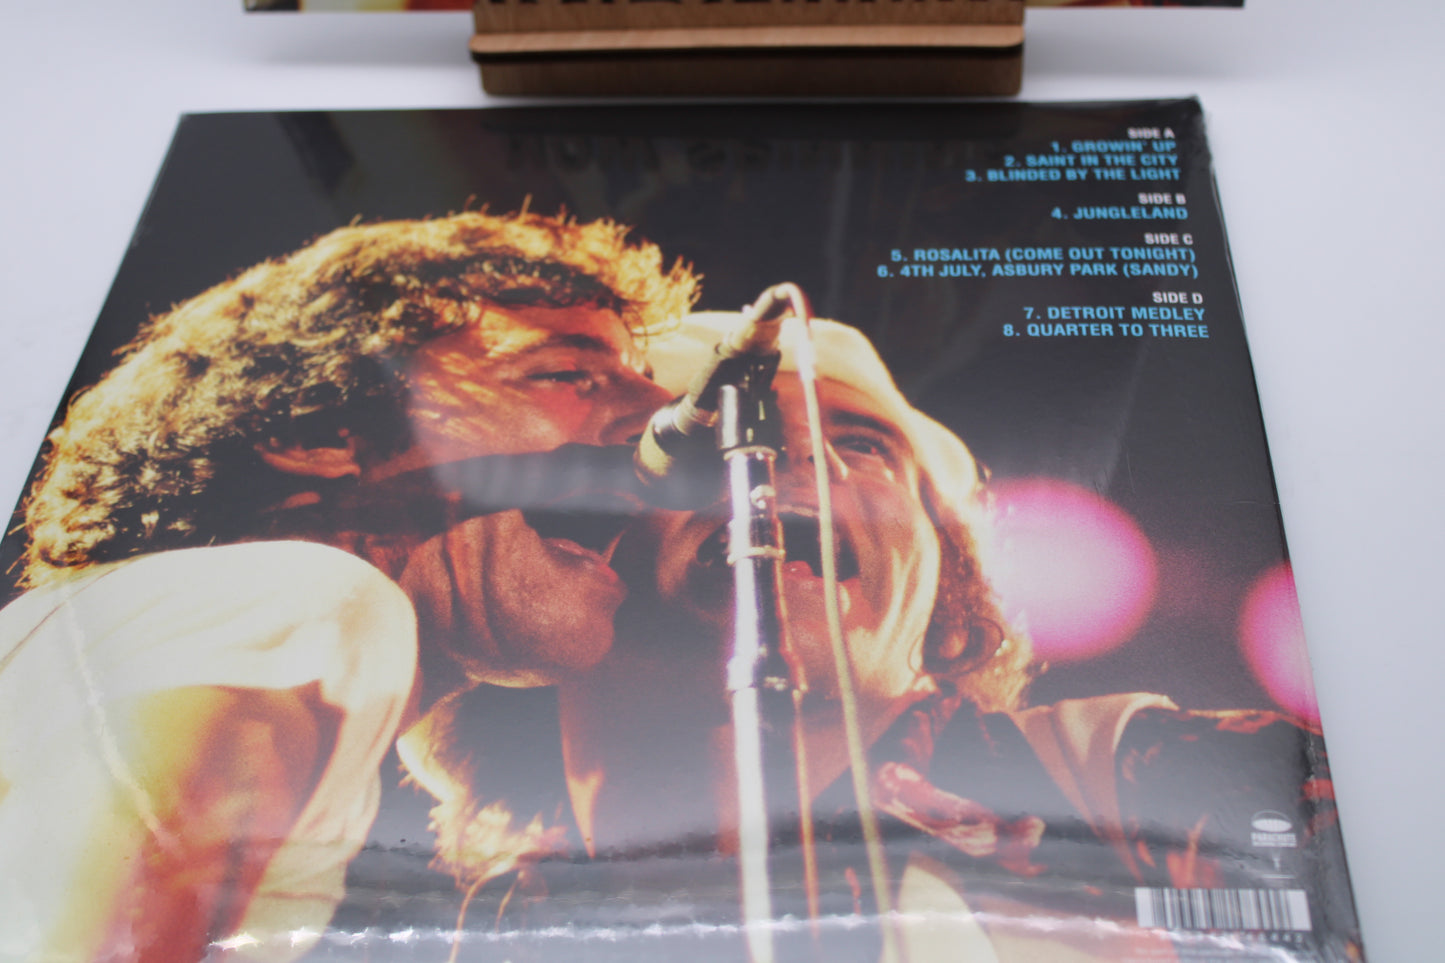 Bruce Springsteen - SEALED - The Gap Year Broadcast Live in Cleveland 1976 Vinyl Vol 1 & 2 BLV